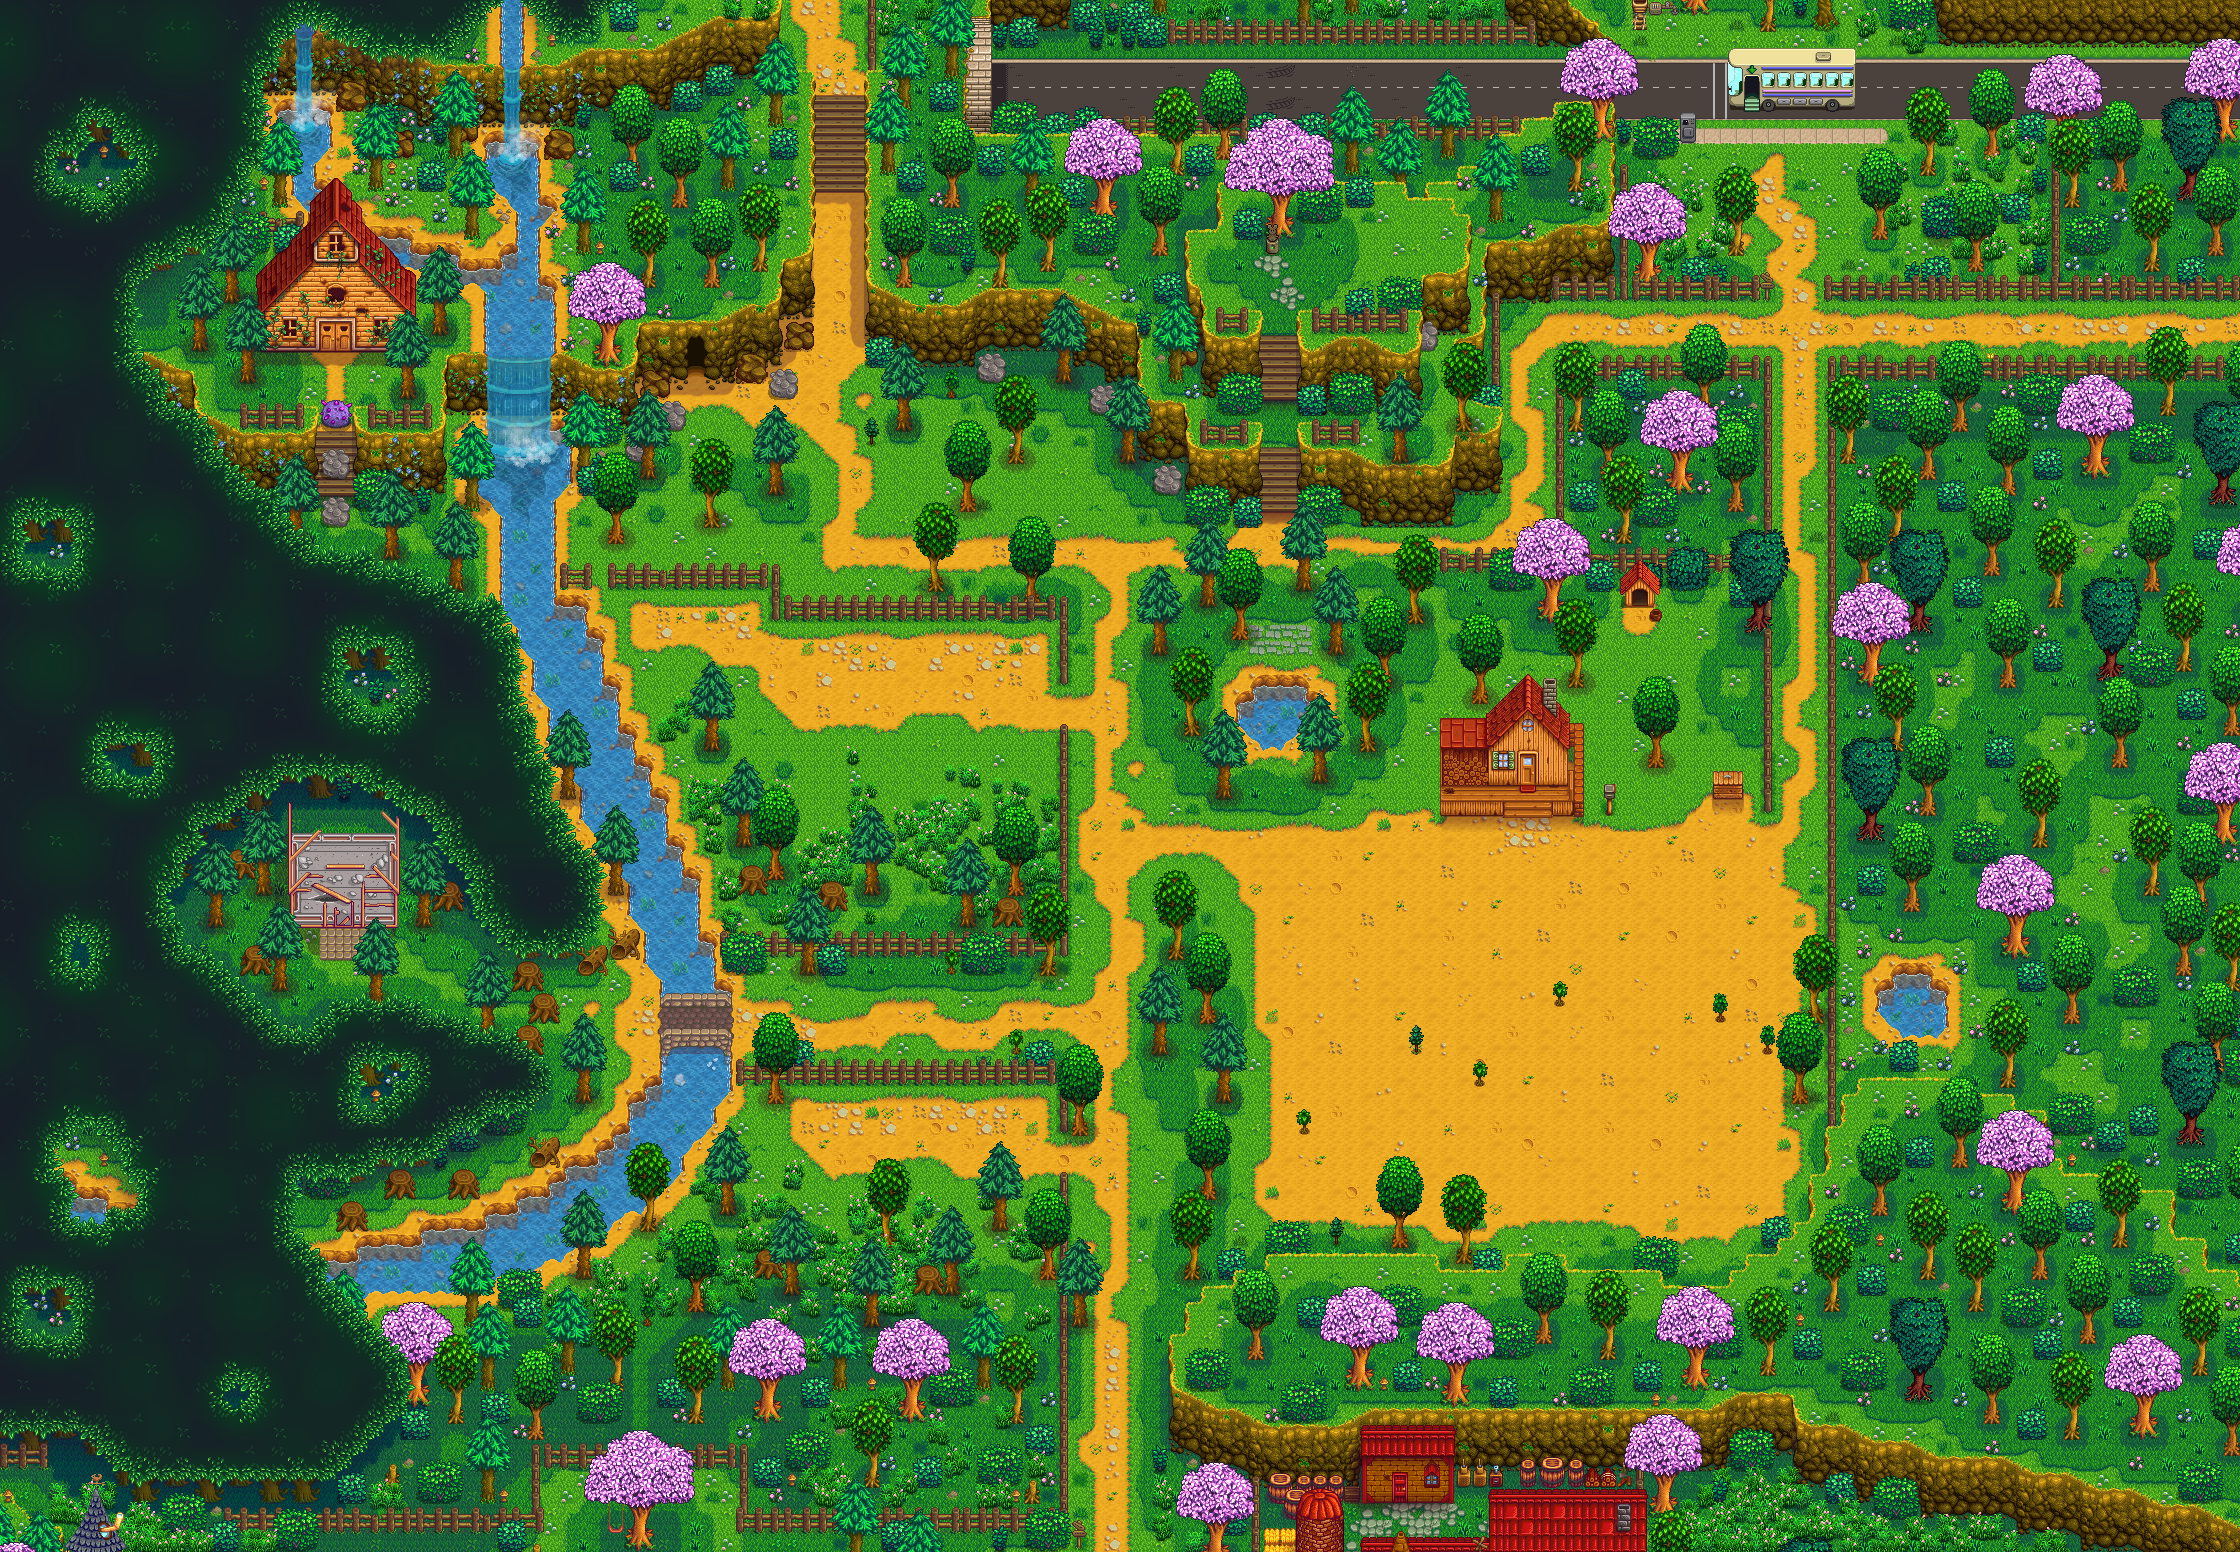 Stardew Valley Expanded Farm Map Grandpa's Farm | Stardew Valley Expanded Wiki | Fandom